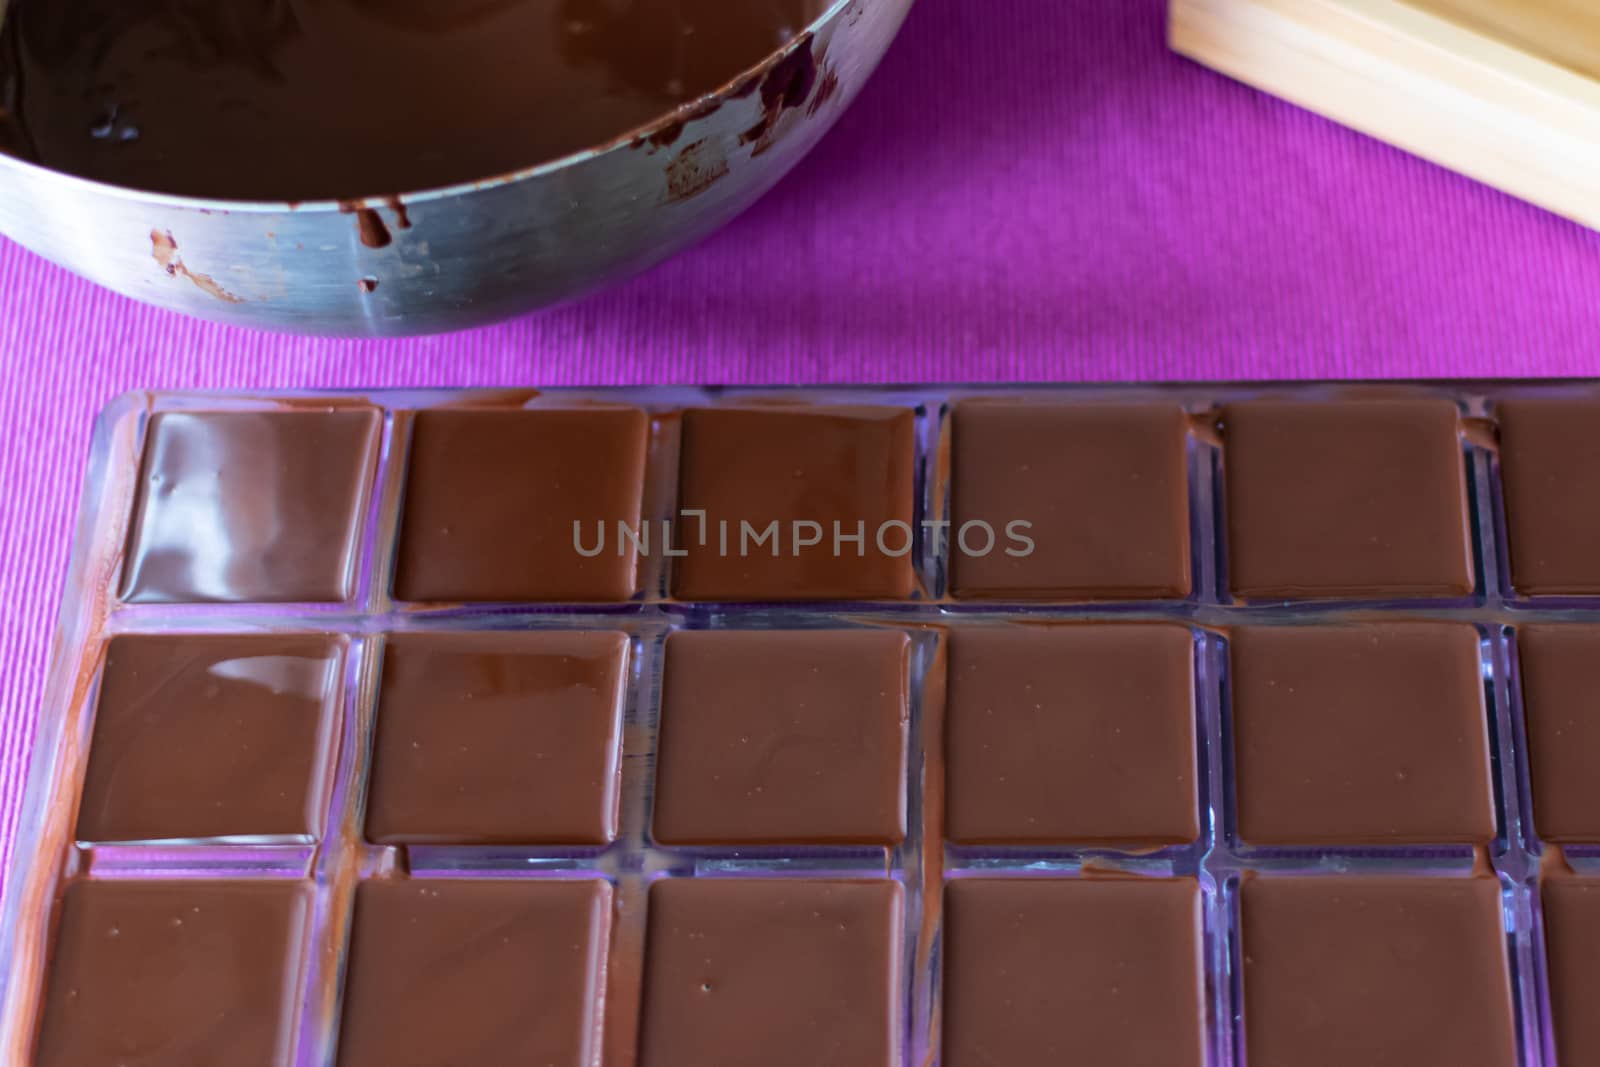 The molds are filled with liquid chocolate mass. by bonilook